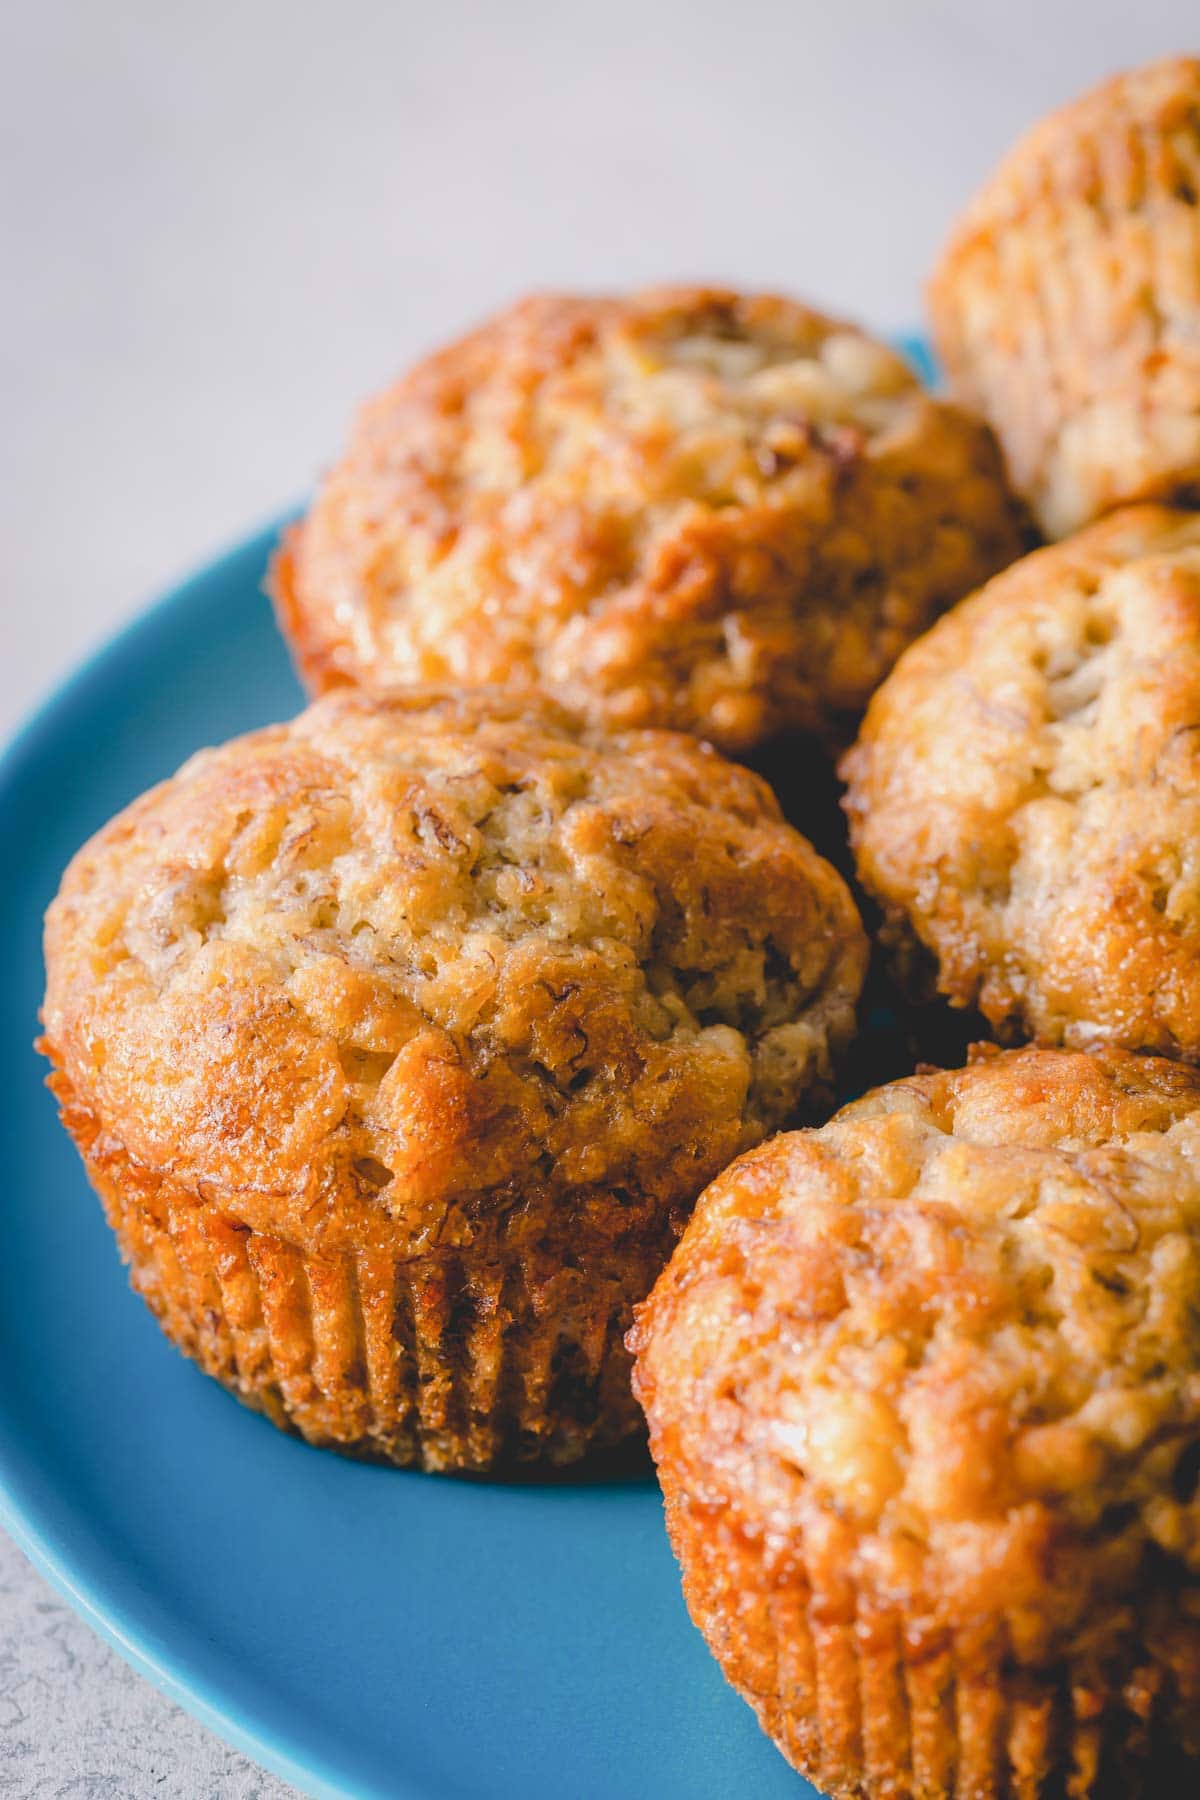 Banana muffins on a blue plate.